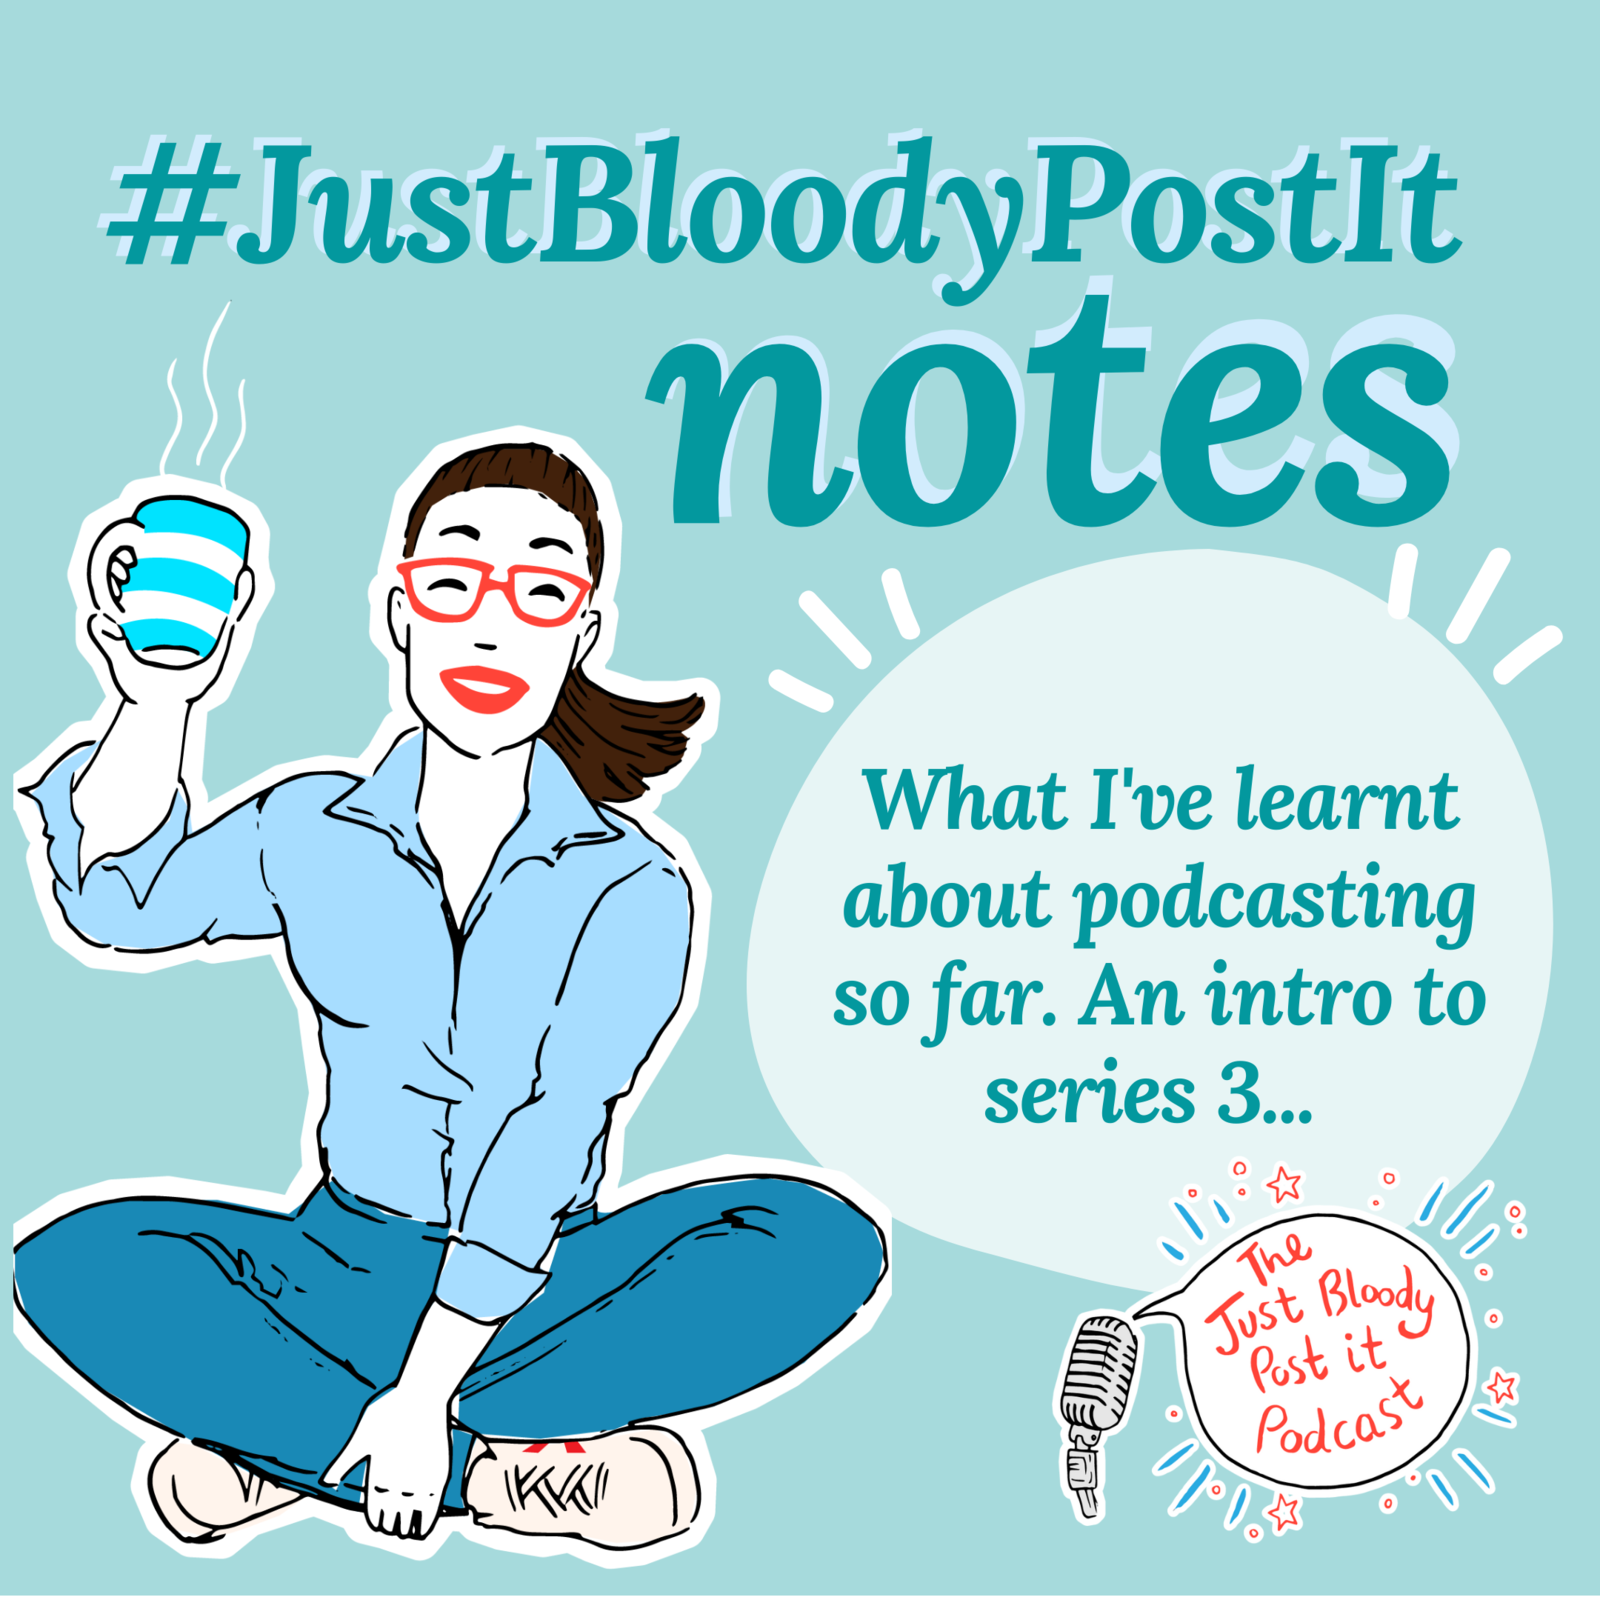 S3 Ep43: What I've learnt about podcasting so far, a #JustBloodyPostIt Note to get you in the mood for series 3